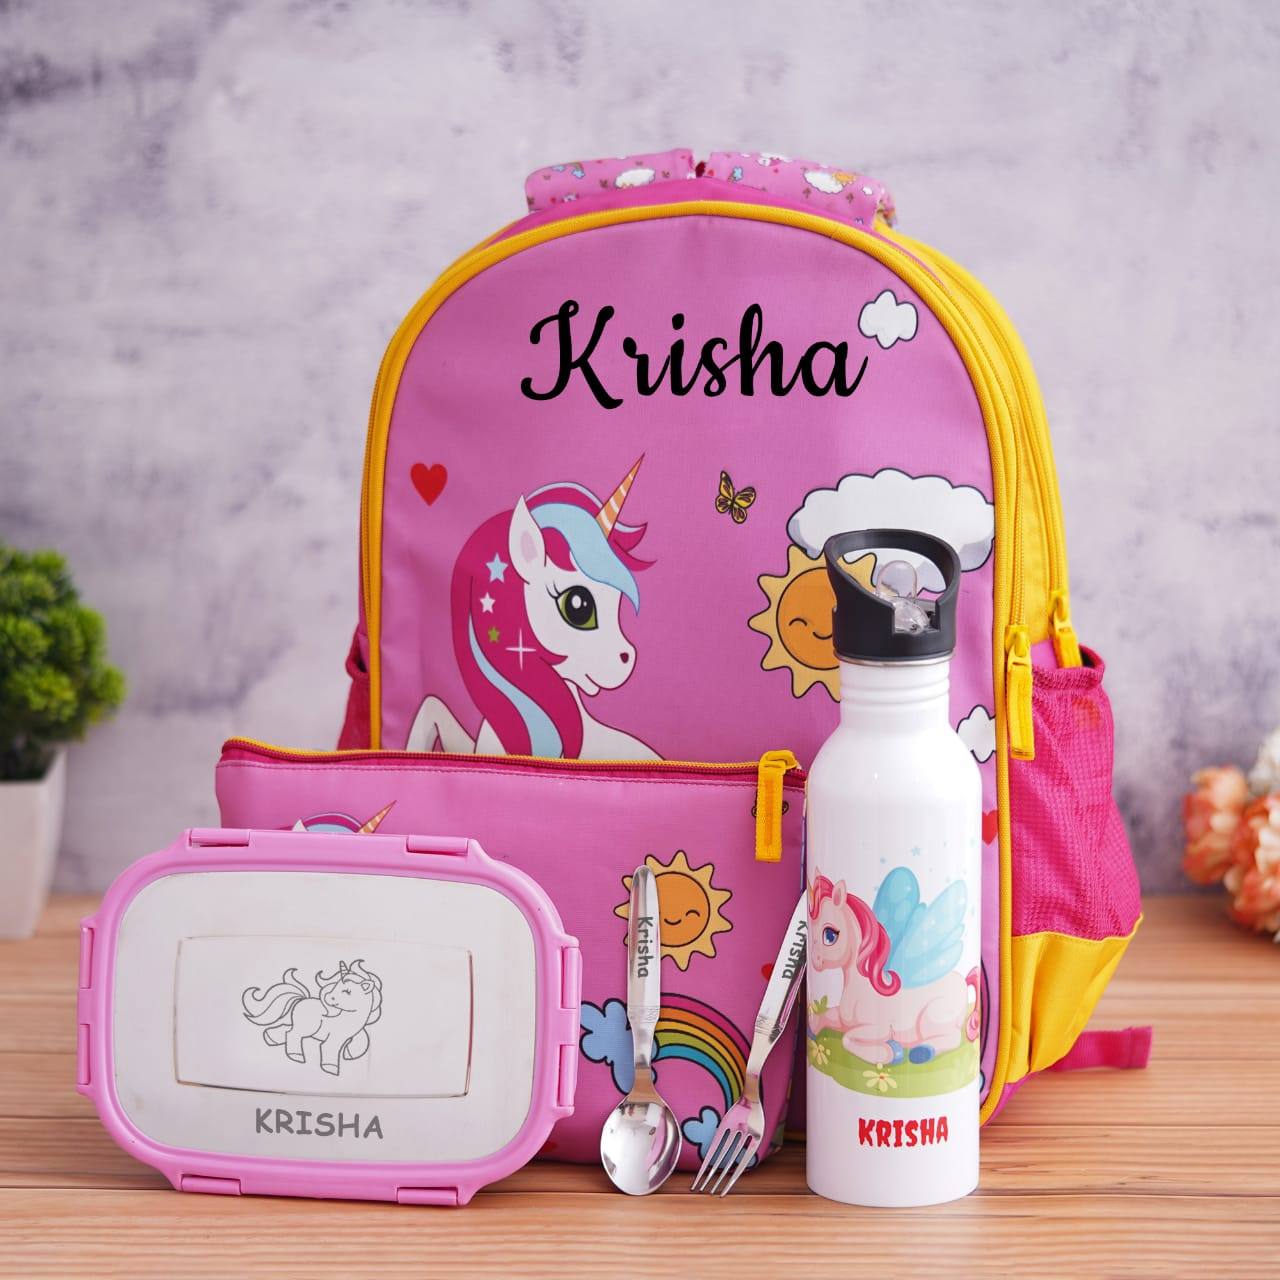 Kids Lunch Bag - WBG0504 - WBG0504 at Rs 139.00 | Gifts for all occasions  by Wedtree